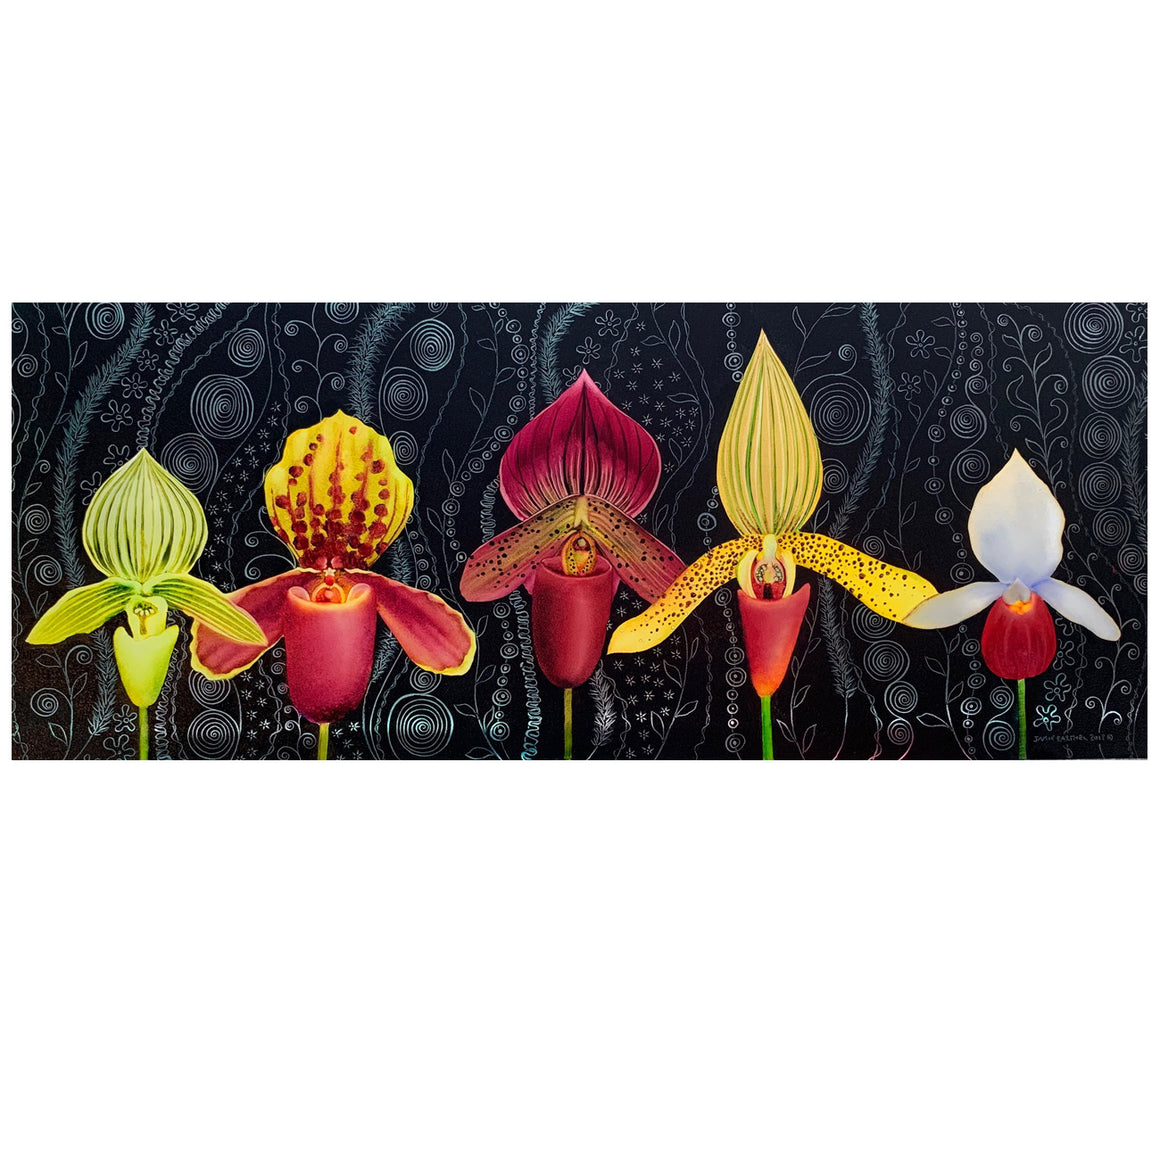 Lady Slippers 9" x 22"